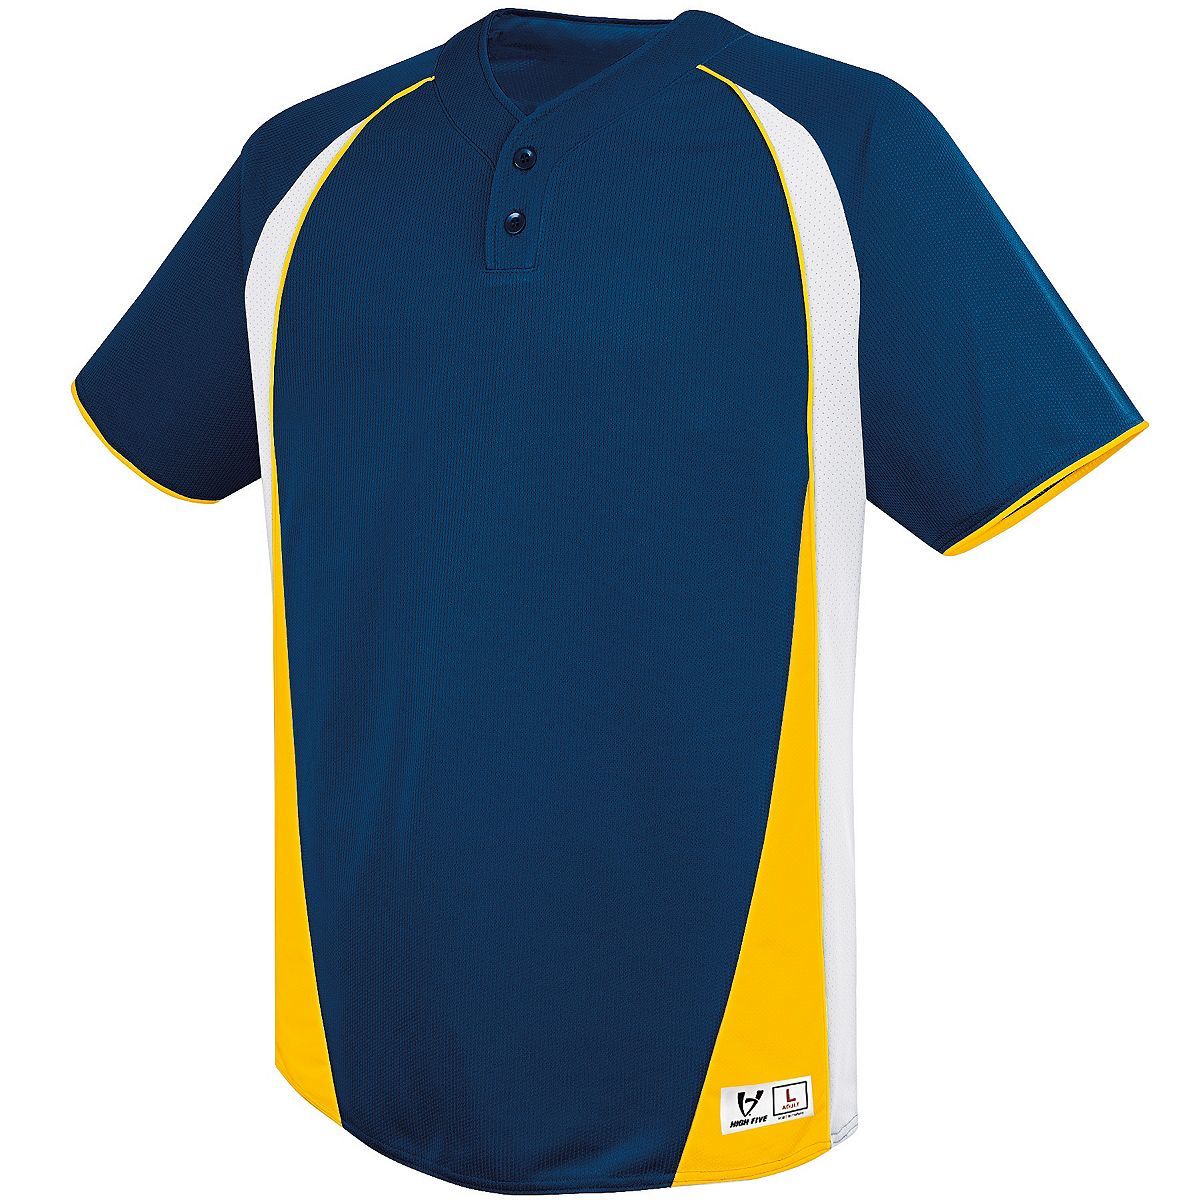 Augusta Sportswear Youth Ace Two-Button Jersey in Navy/White/Athletic Gold  -Part of the Youth, Youth-Jersey, Augusta-Products, Baseball, Shirts, All-Sports, All-Sports-1 product lines at KanaleyCreations.com